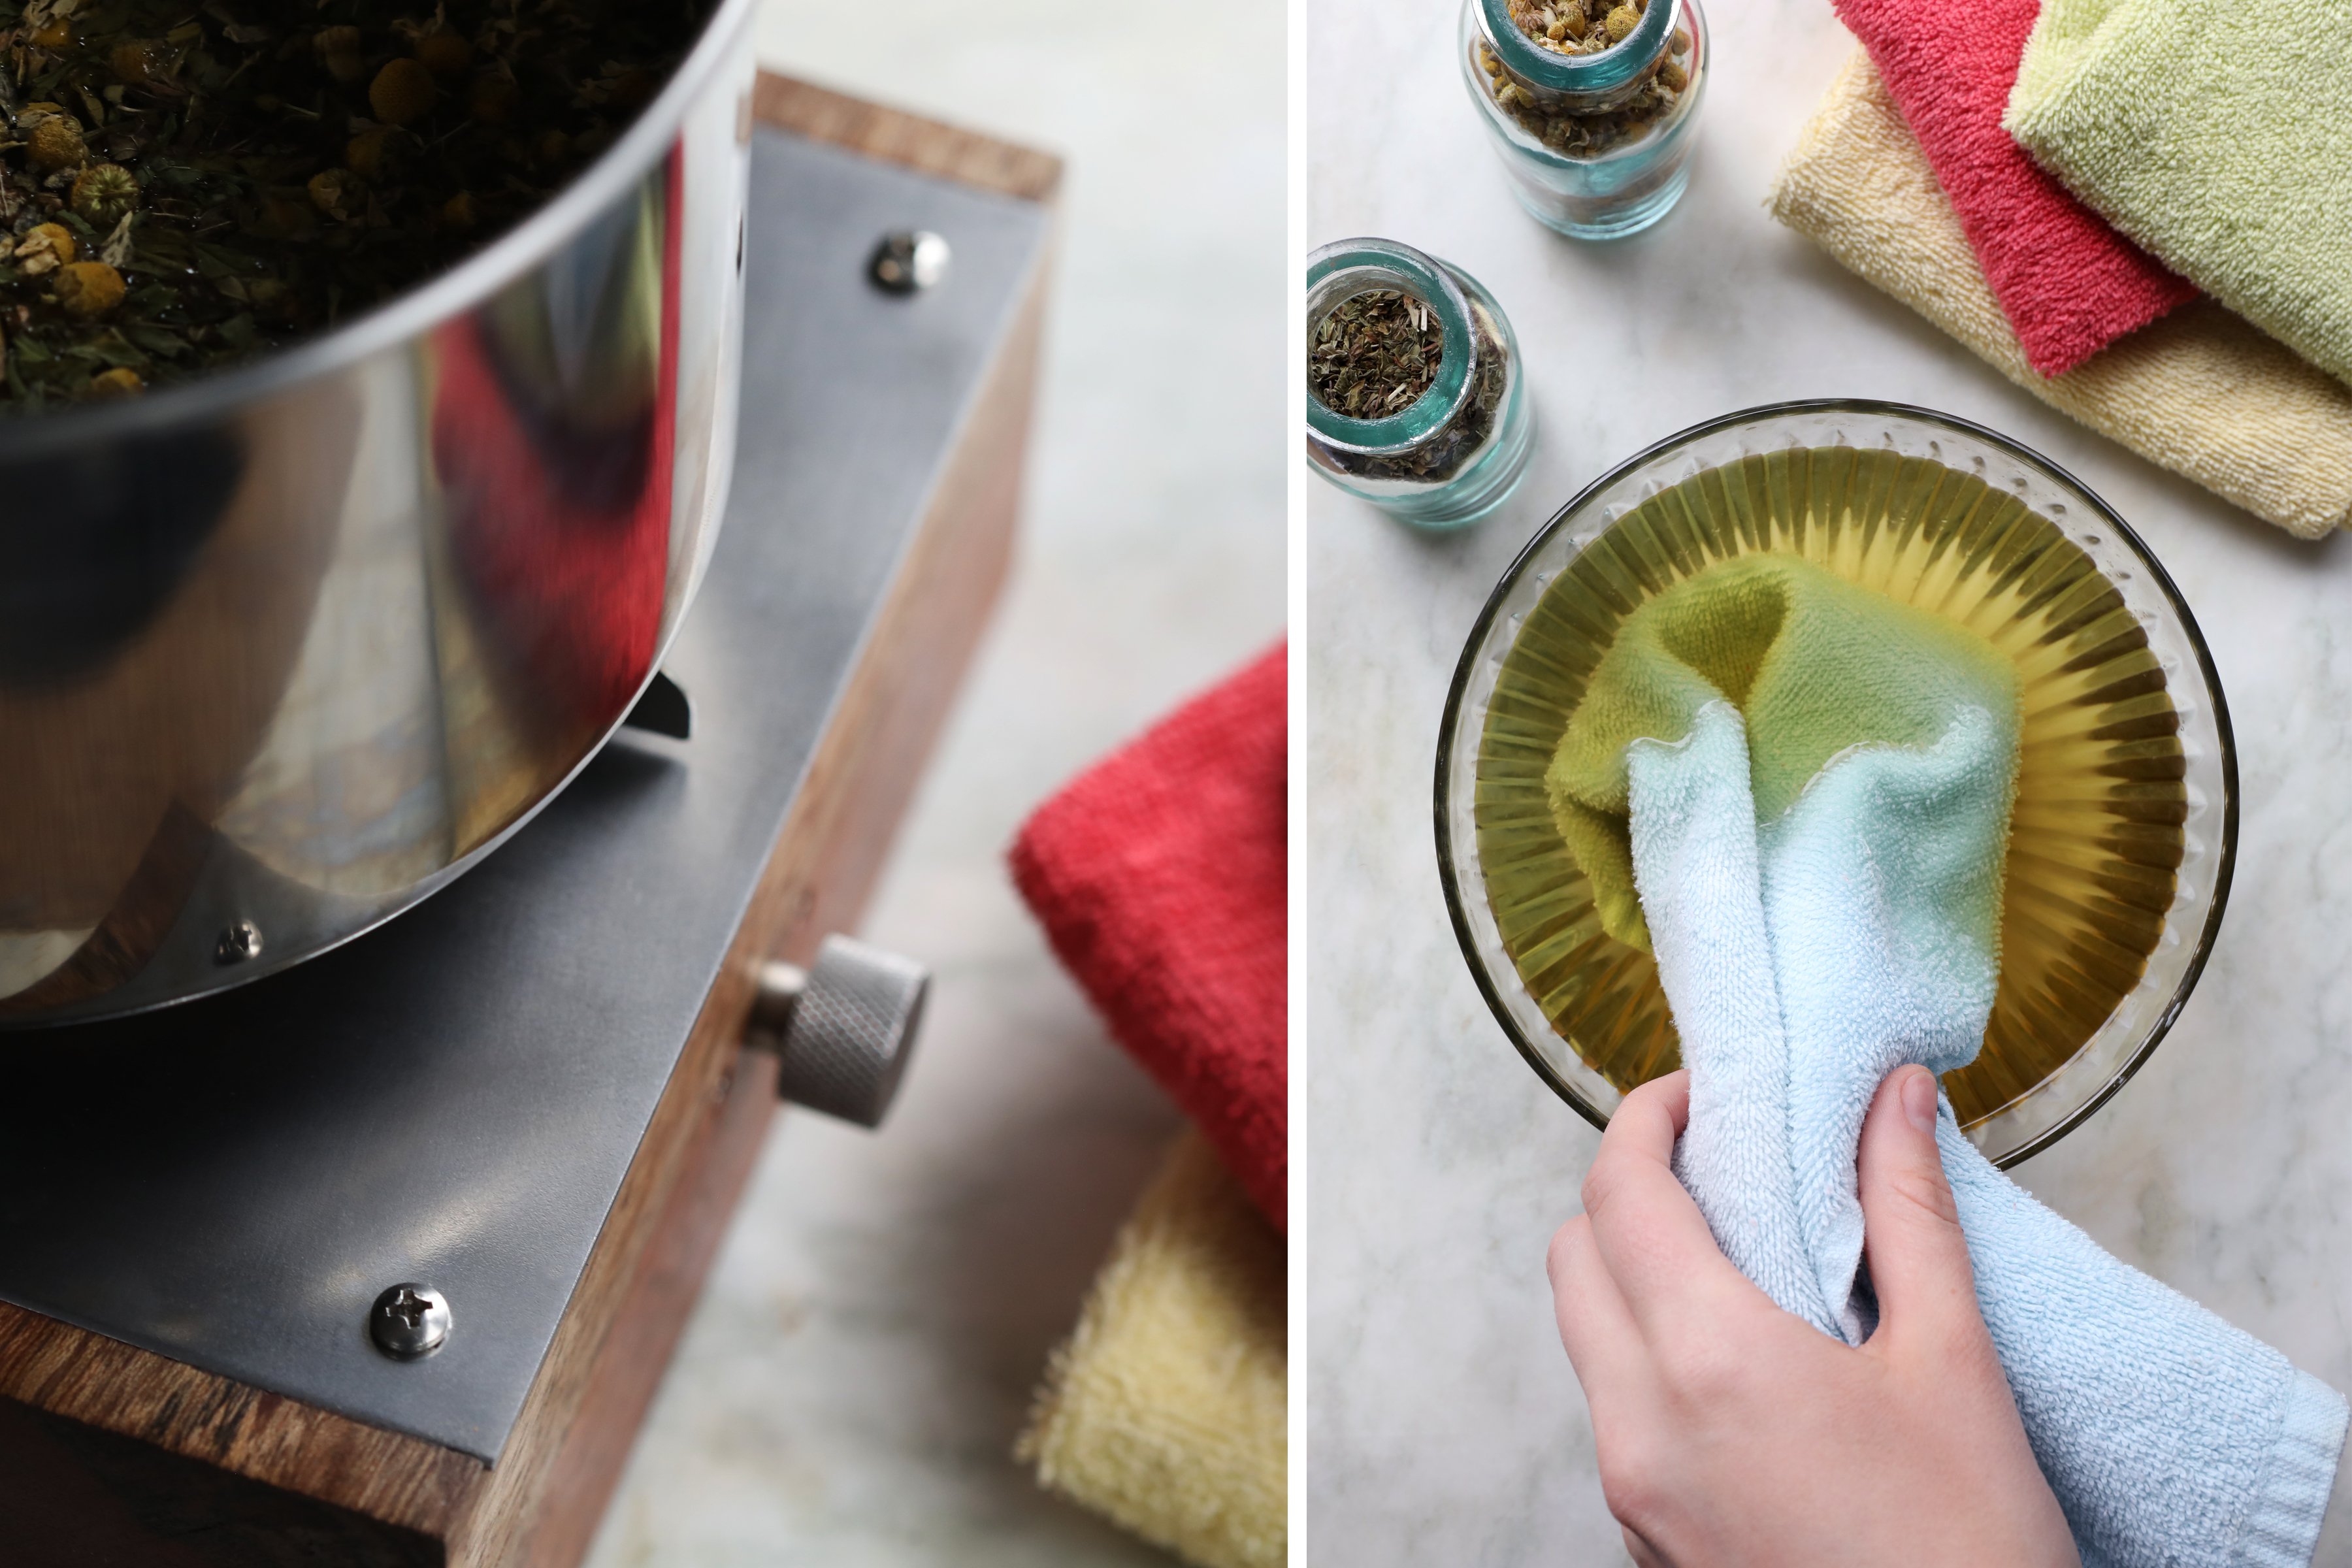 Photo of a wooden electric burner with a pot of simmering herbs on it along side of a photo of a hand dipping a cloth into golden colored liquid.